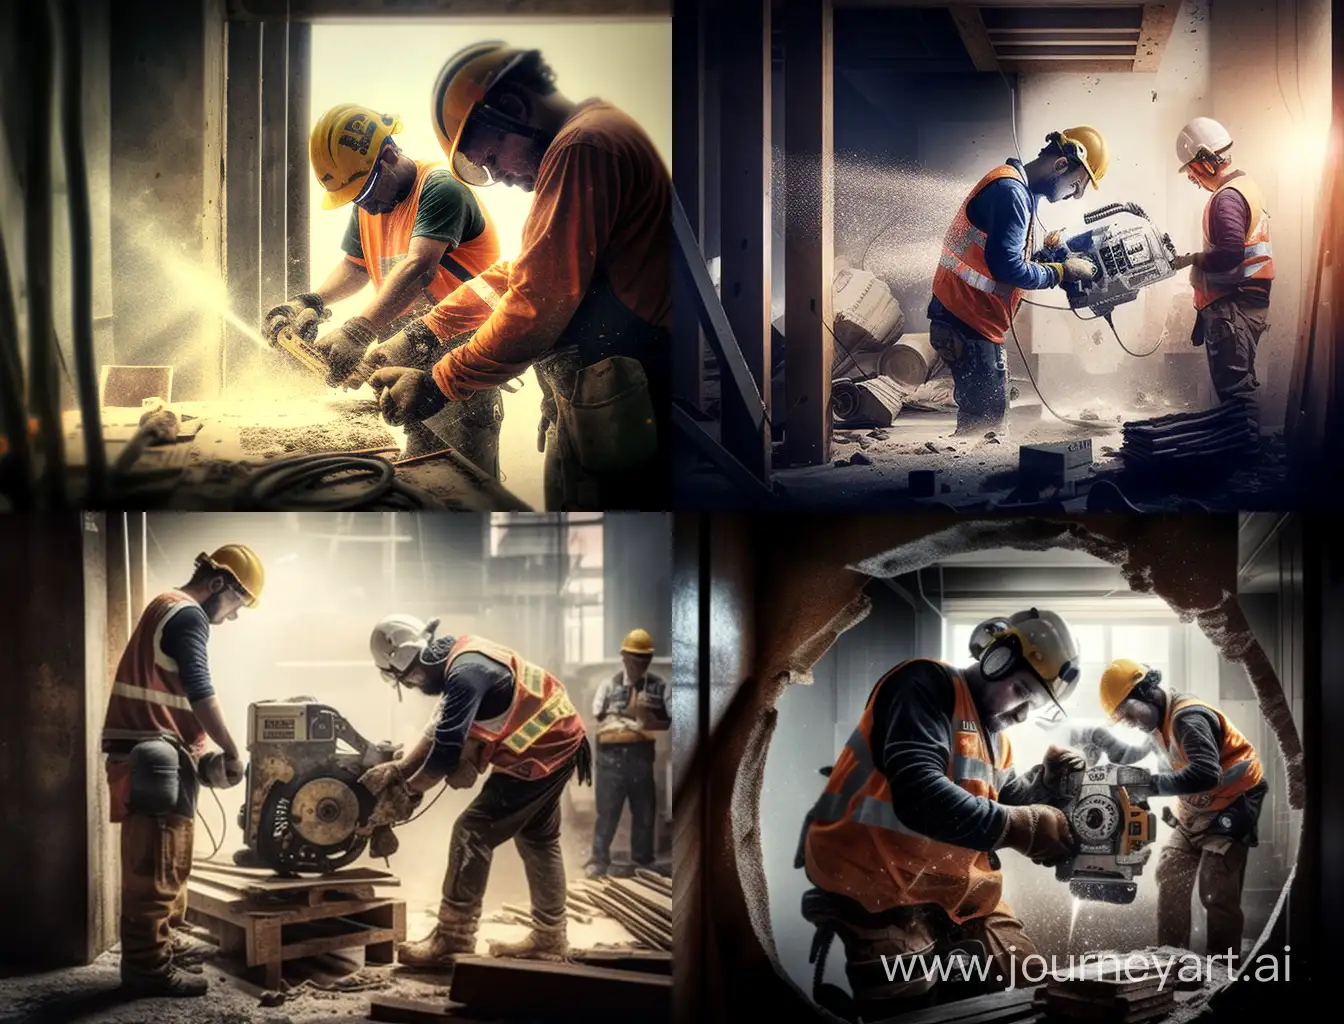 Construction-Workers-Operating-Power-Tools-on-Site